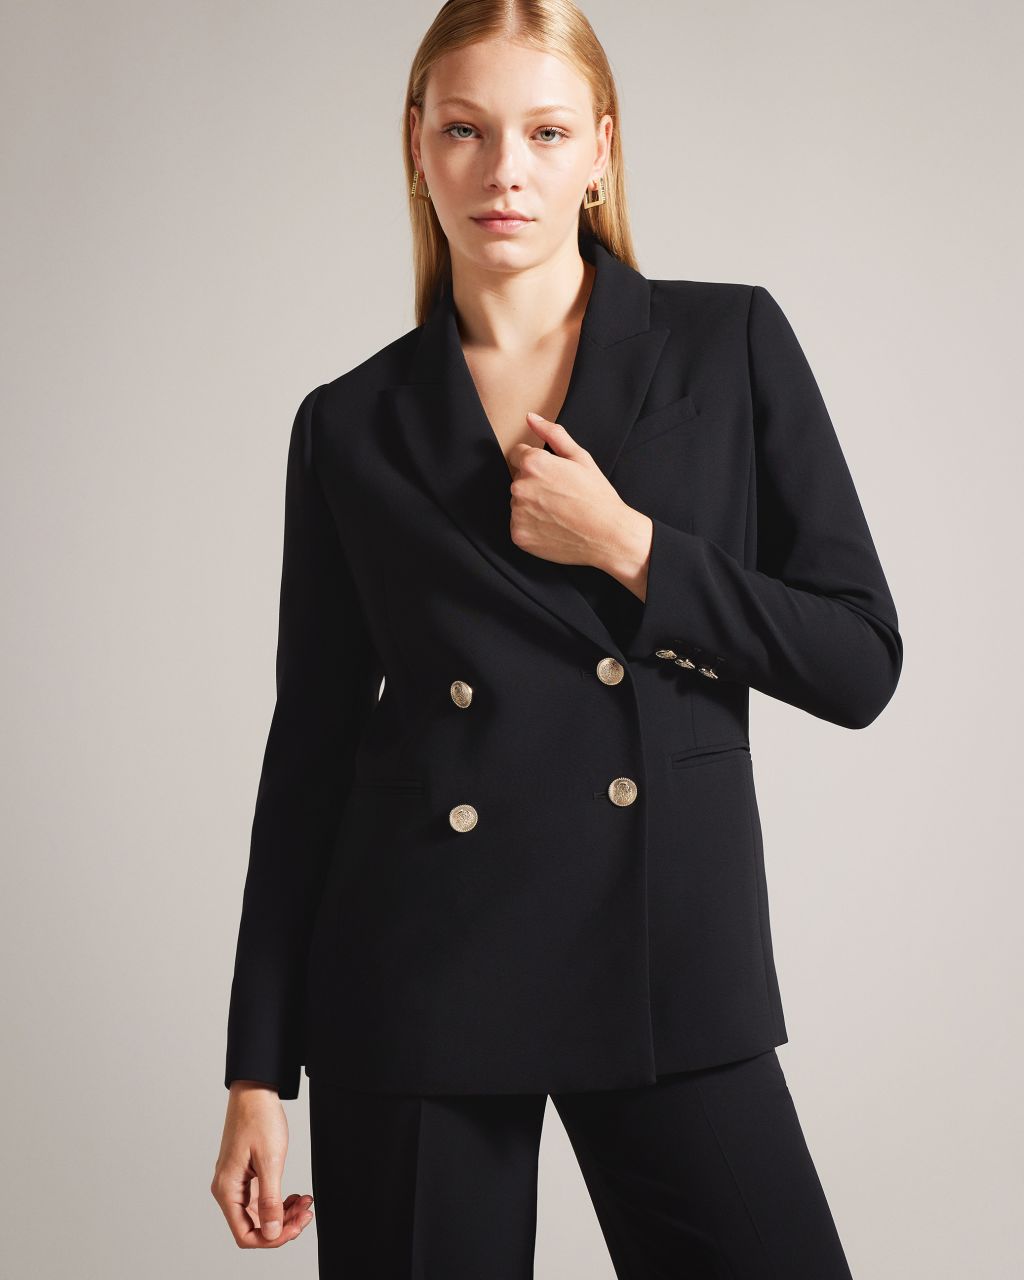 Women's Double Breasted Jacket With Embossed Buttons in Black, Llayla product